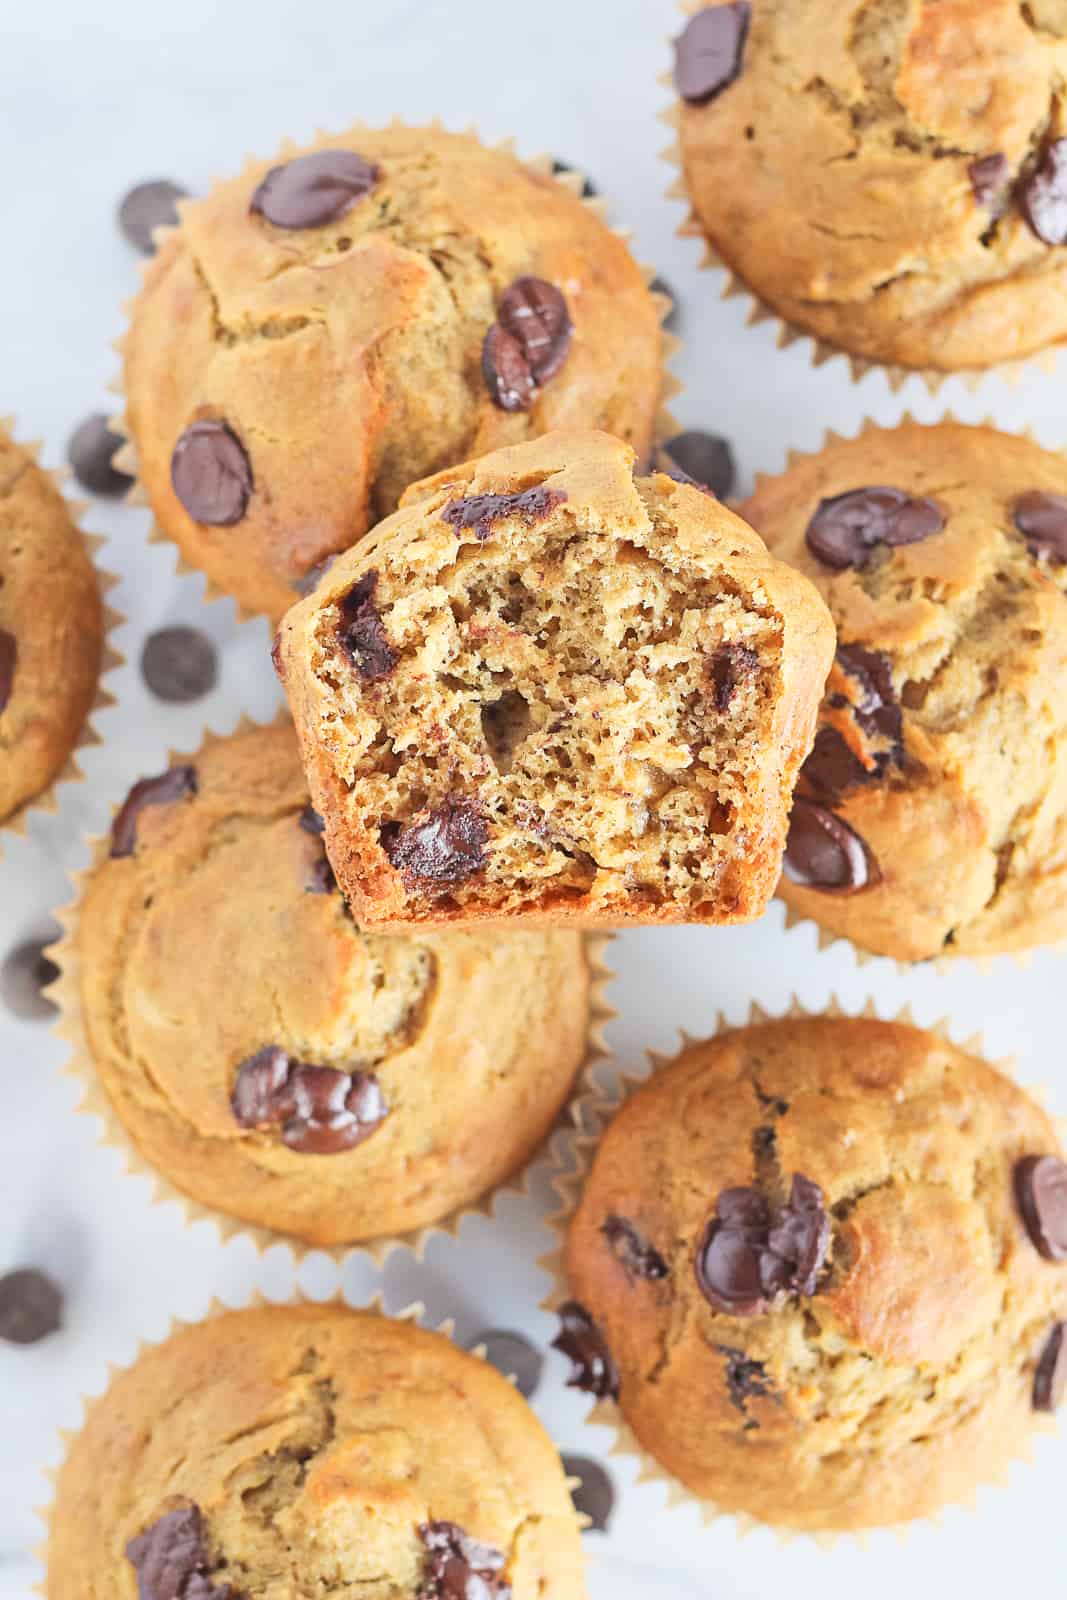 Bite out of a chocolate chip muffin.